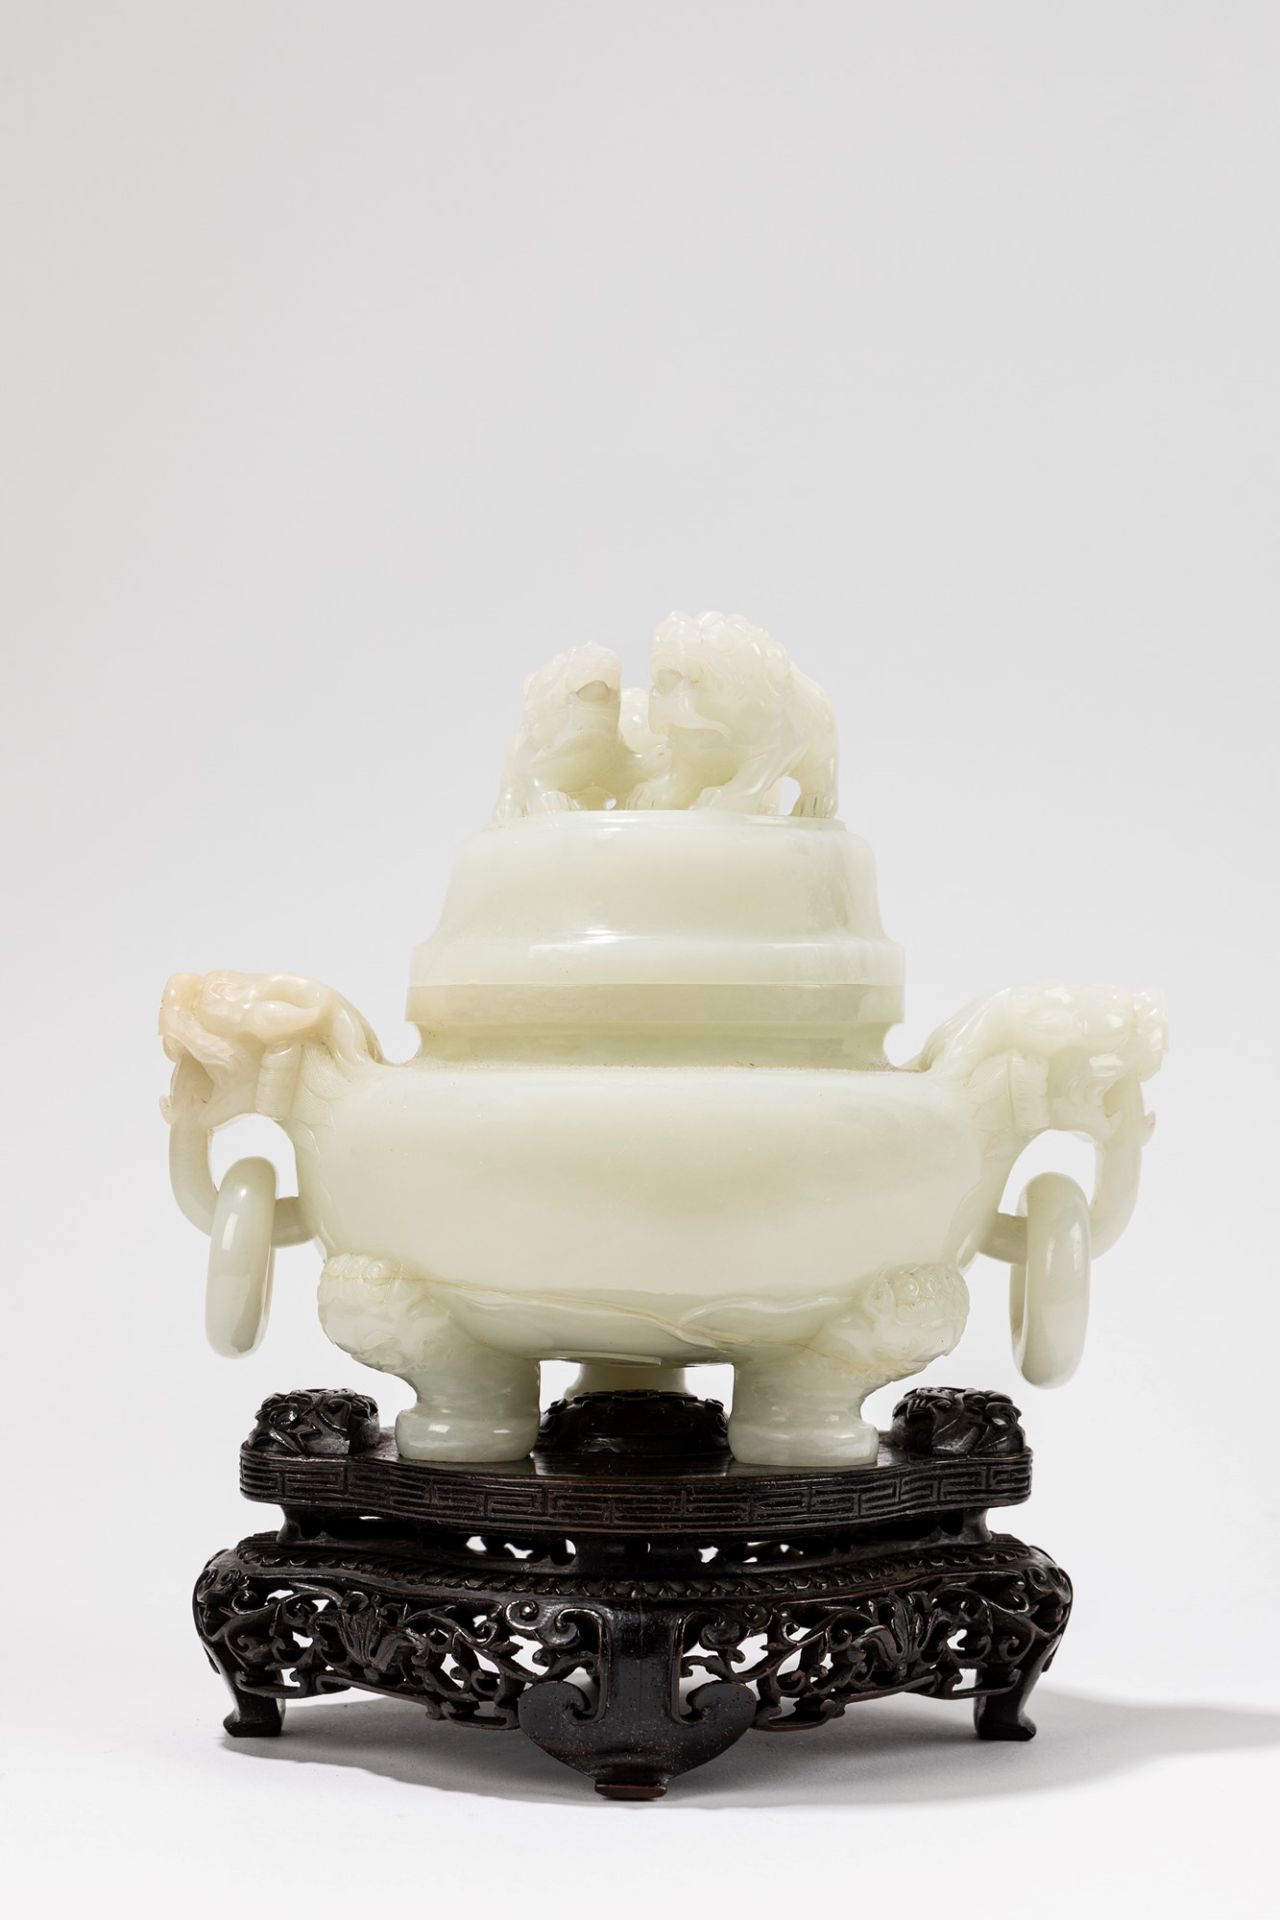 A FINE WHITE TRIP POD CENSER AND COVER, China, Qing dynasty, 19th century - Image 10 of 10